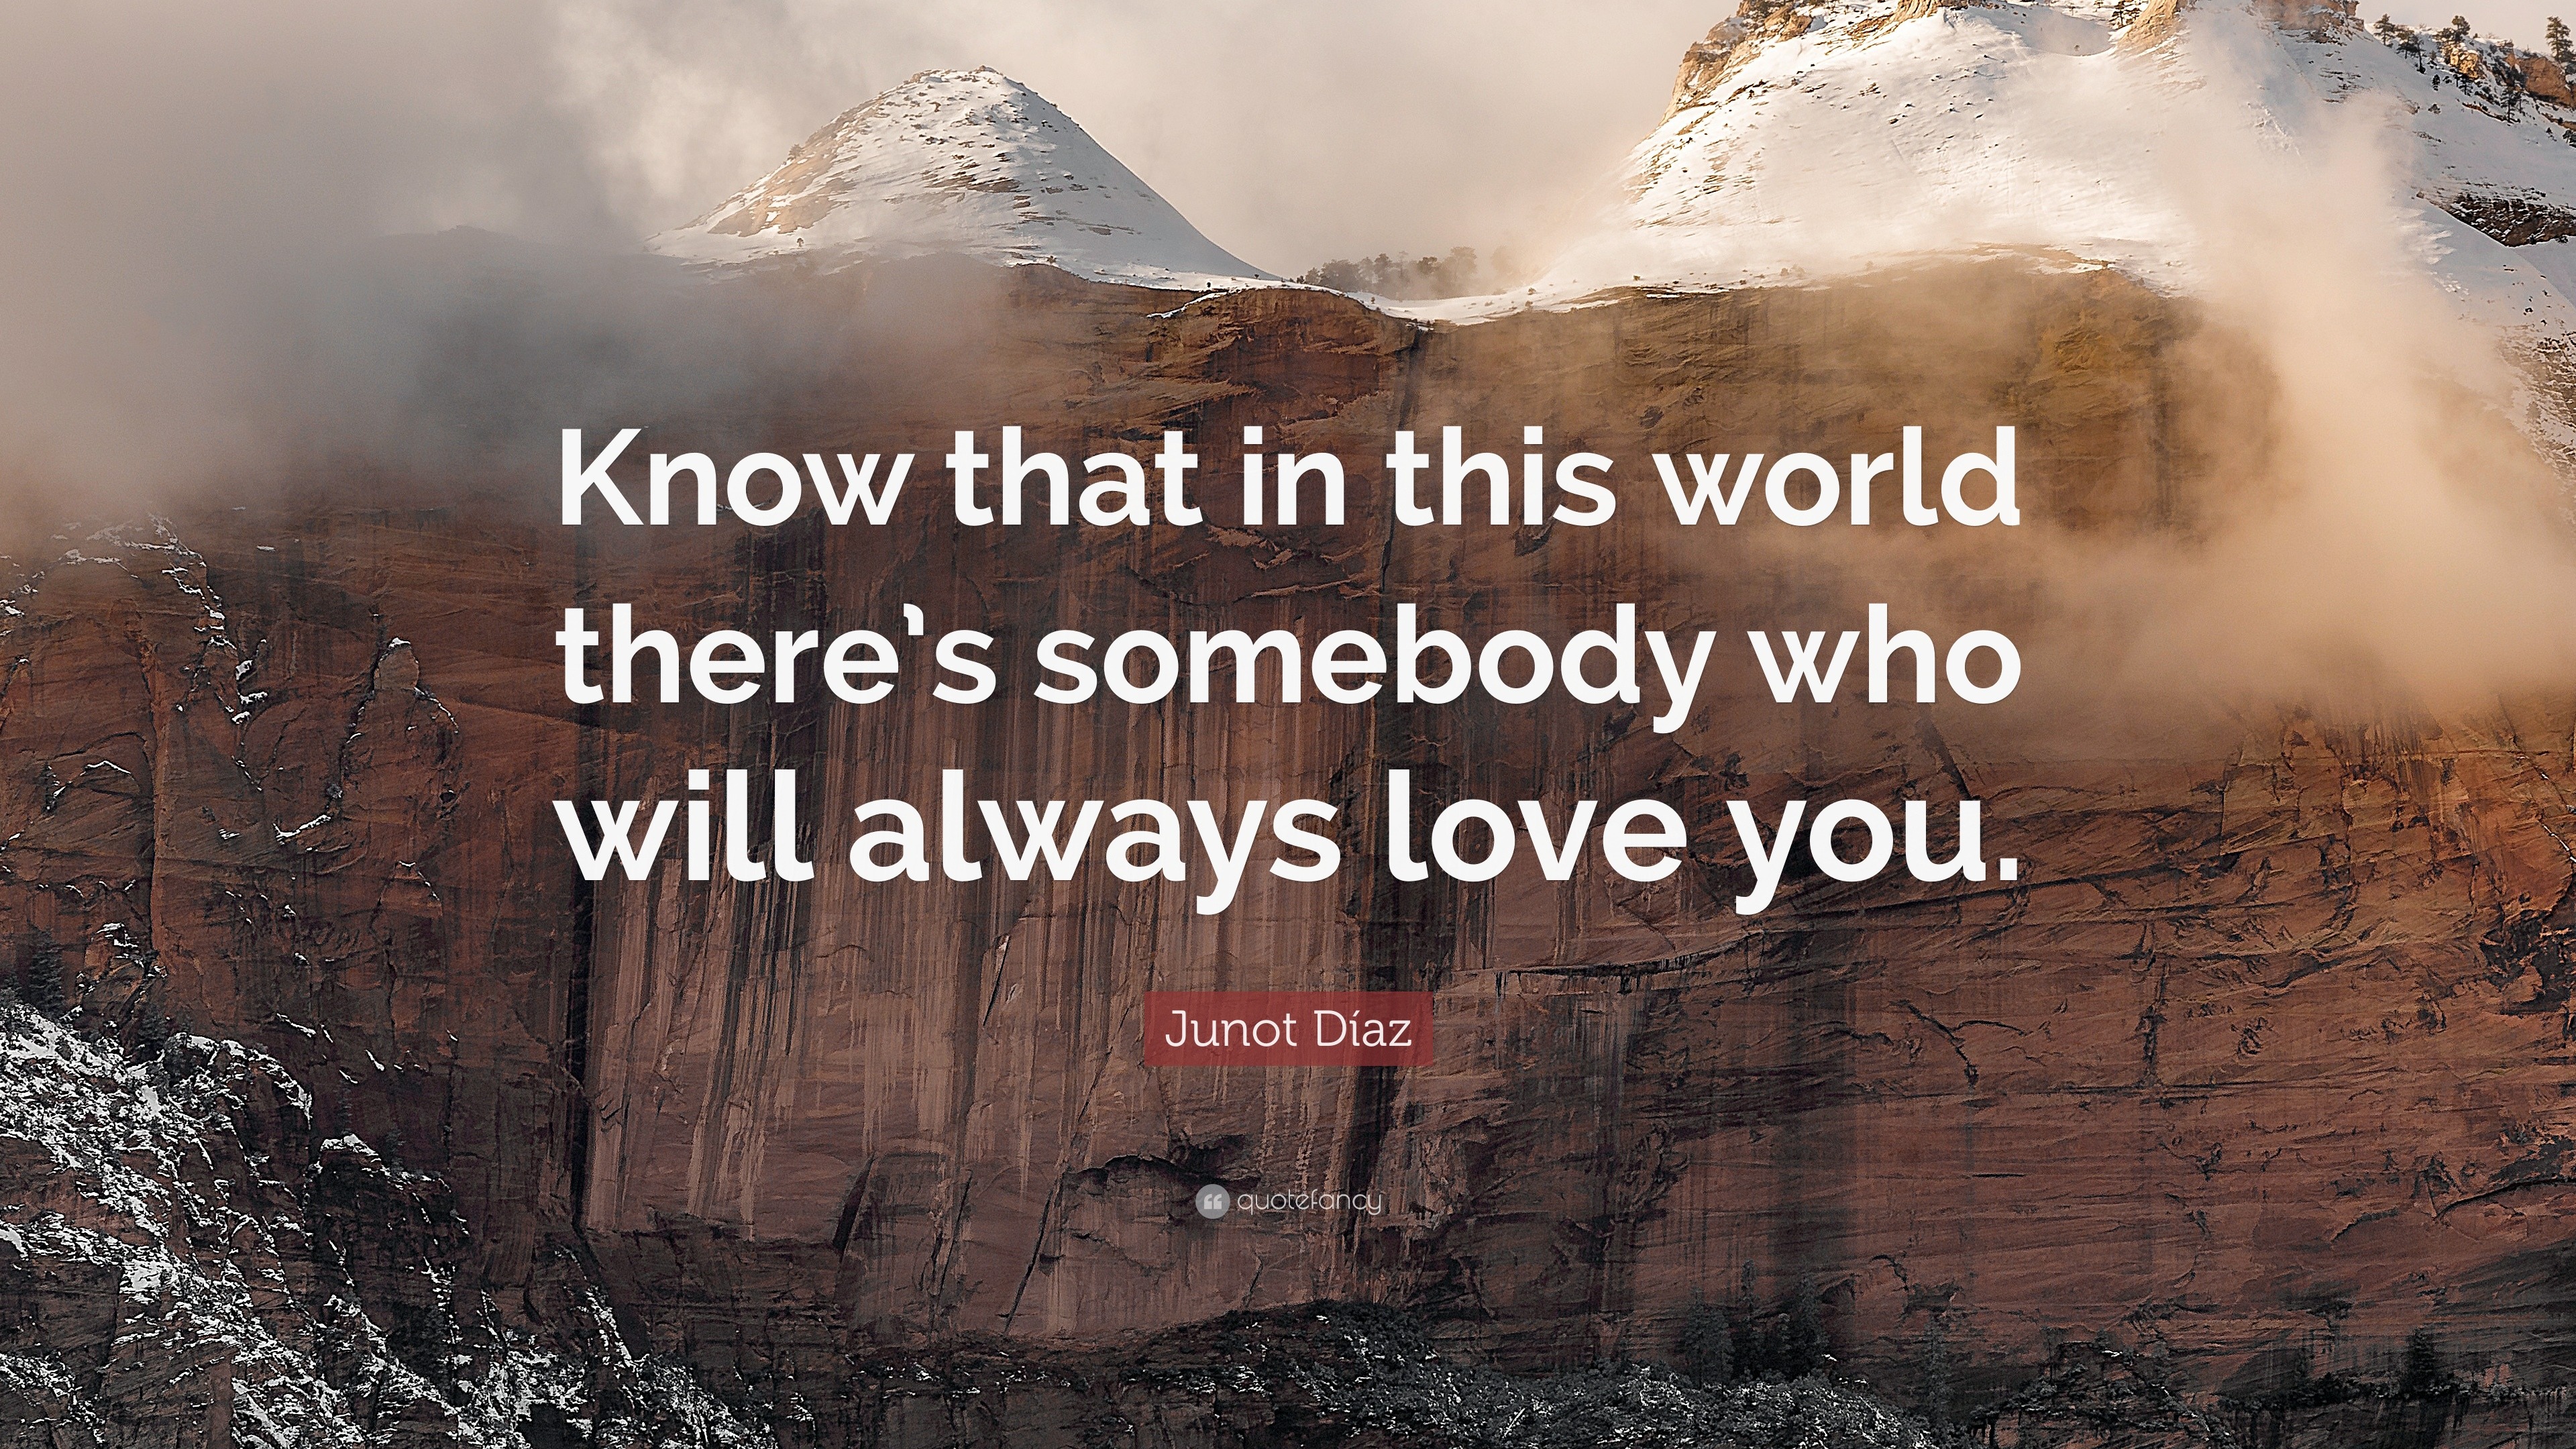 Junot D­az Quote “Know that in this world there s somebody who will always love